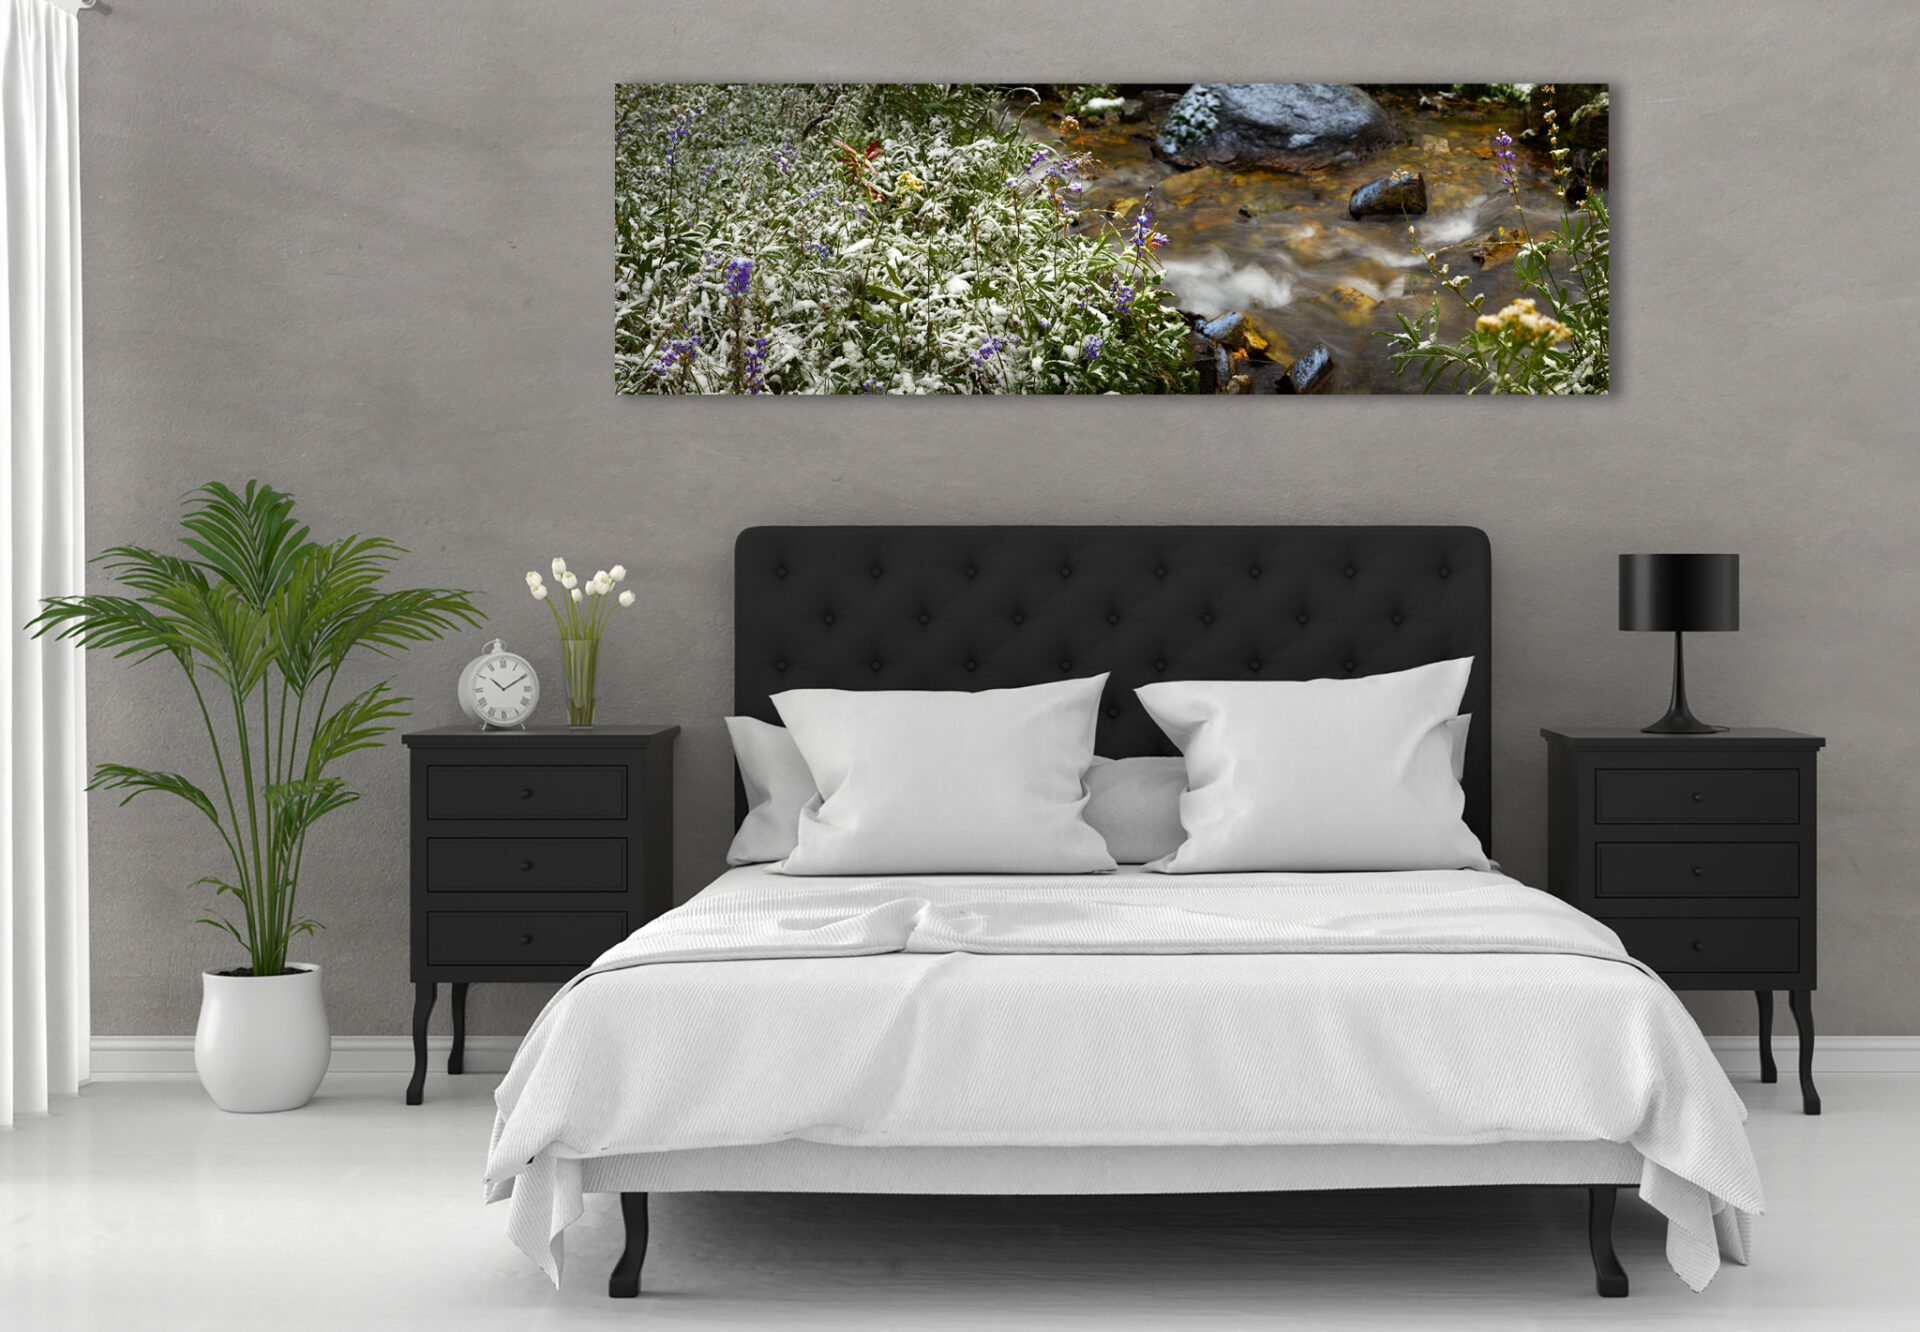 Fine art photograph of Wildflowers in snow hanging on the wall